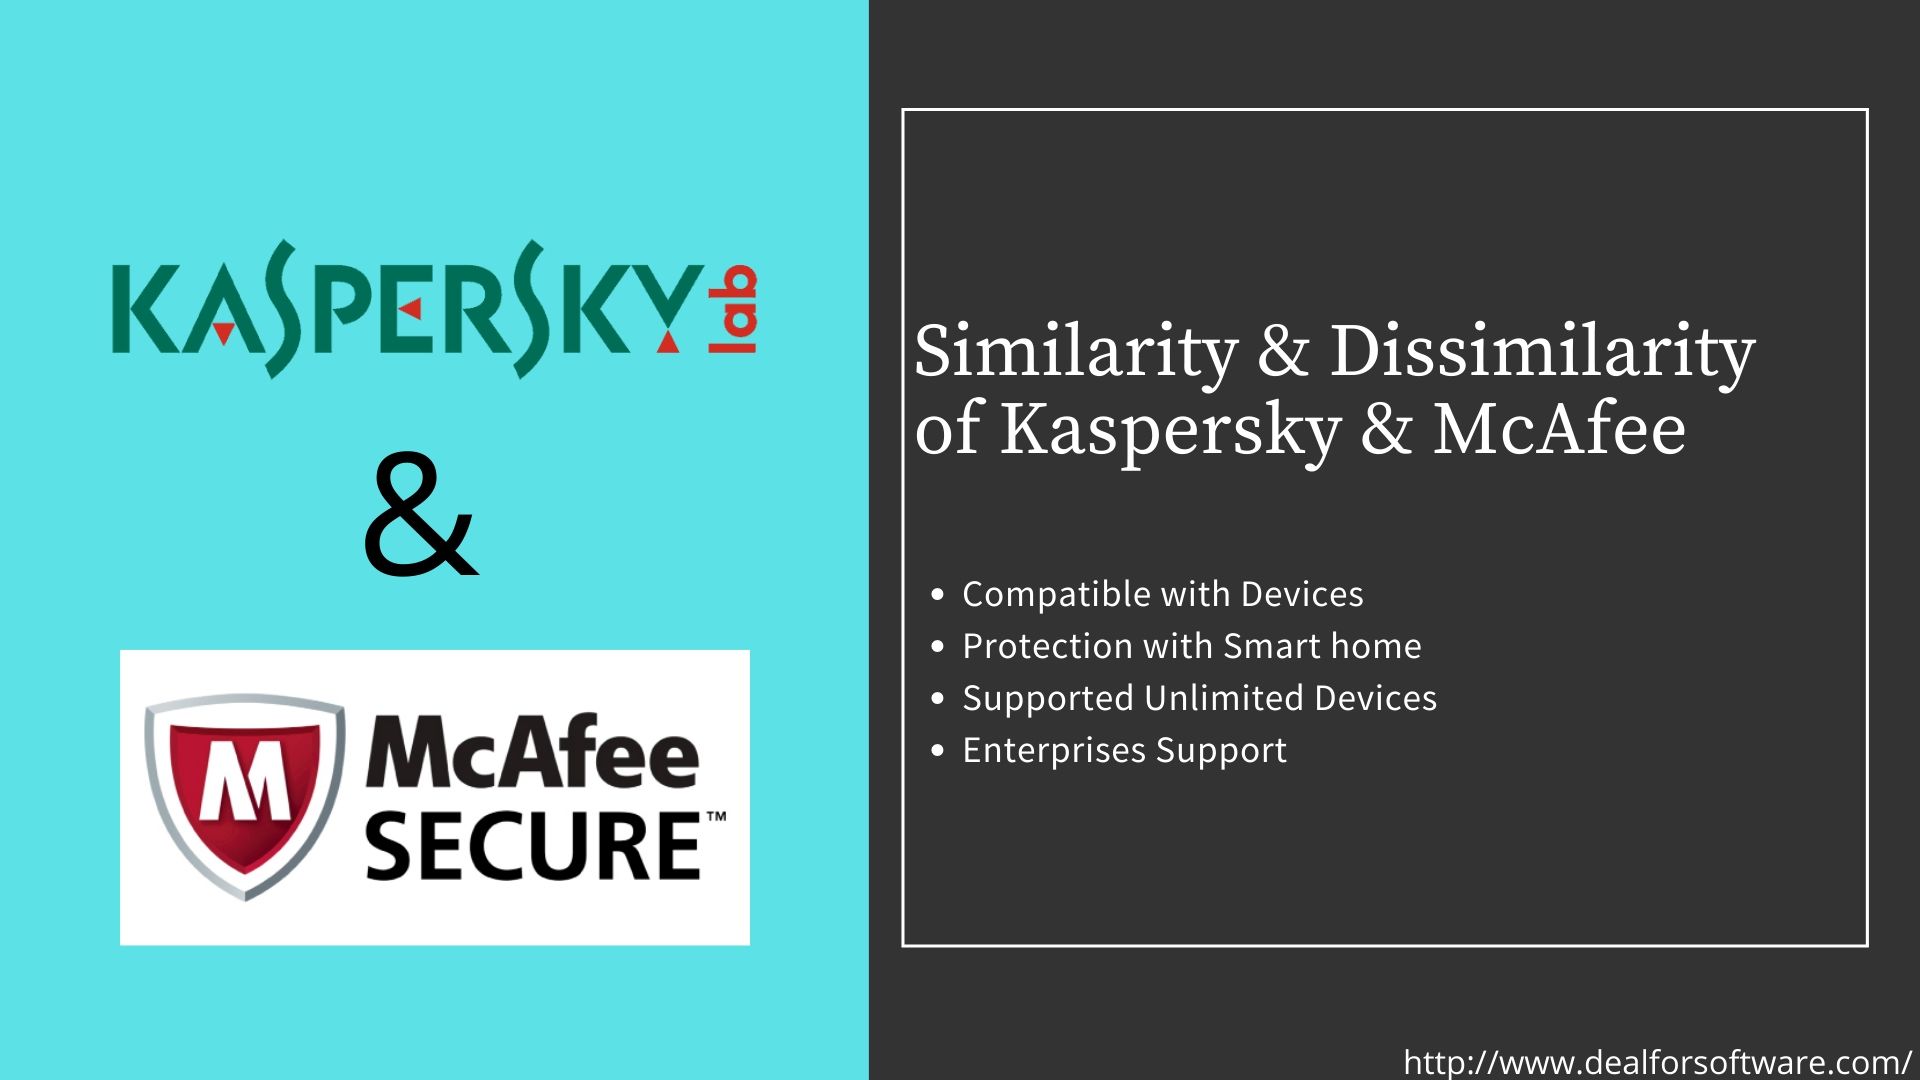 Similarity & Dissimilarity of Kaspersky & McAfee